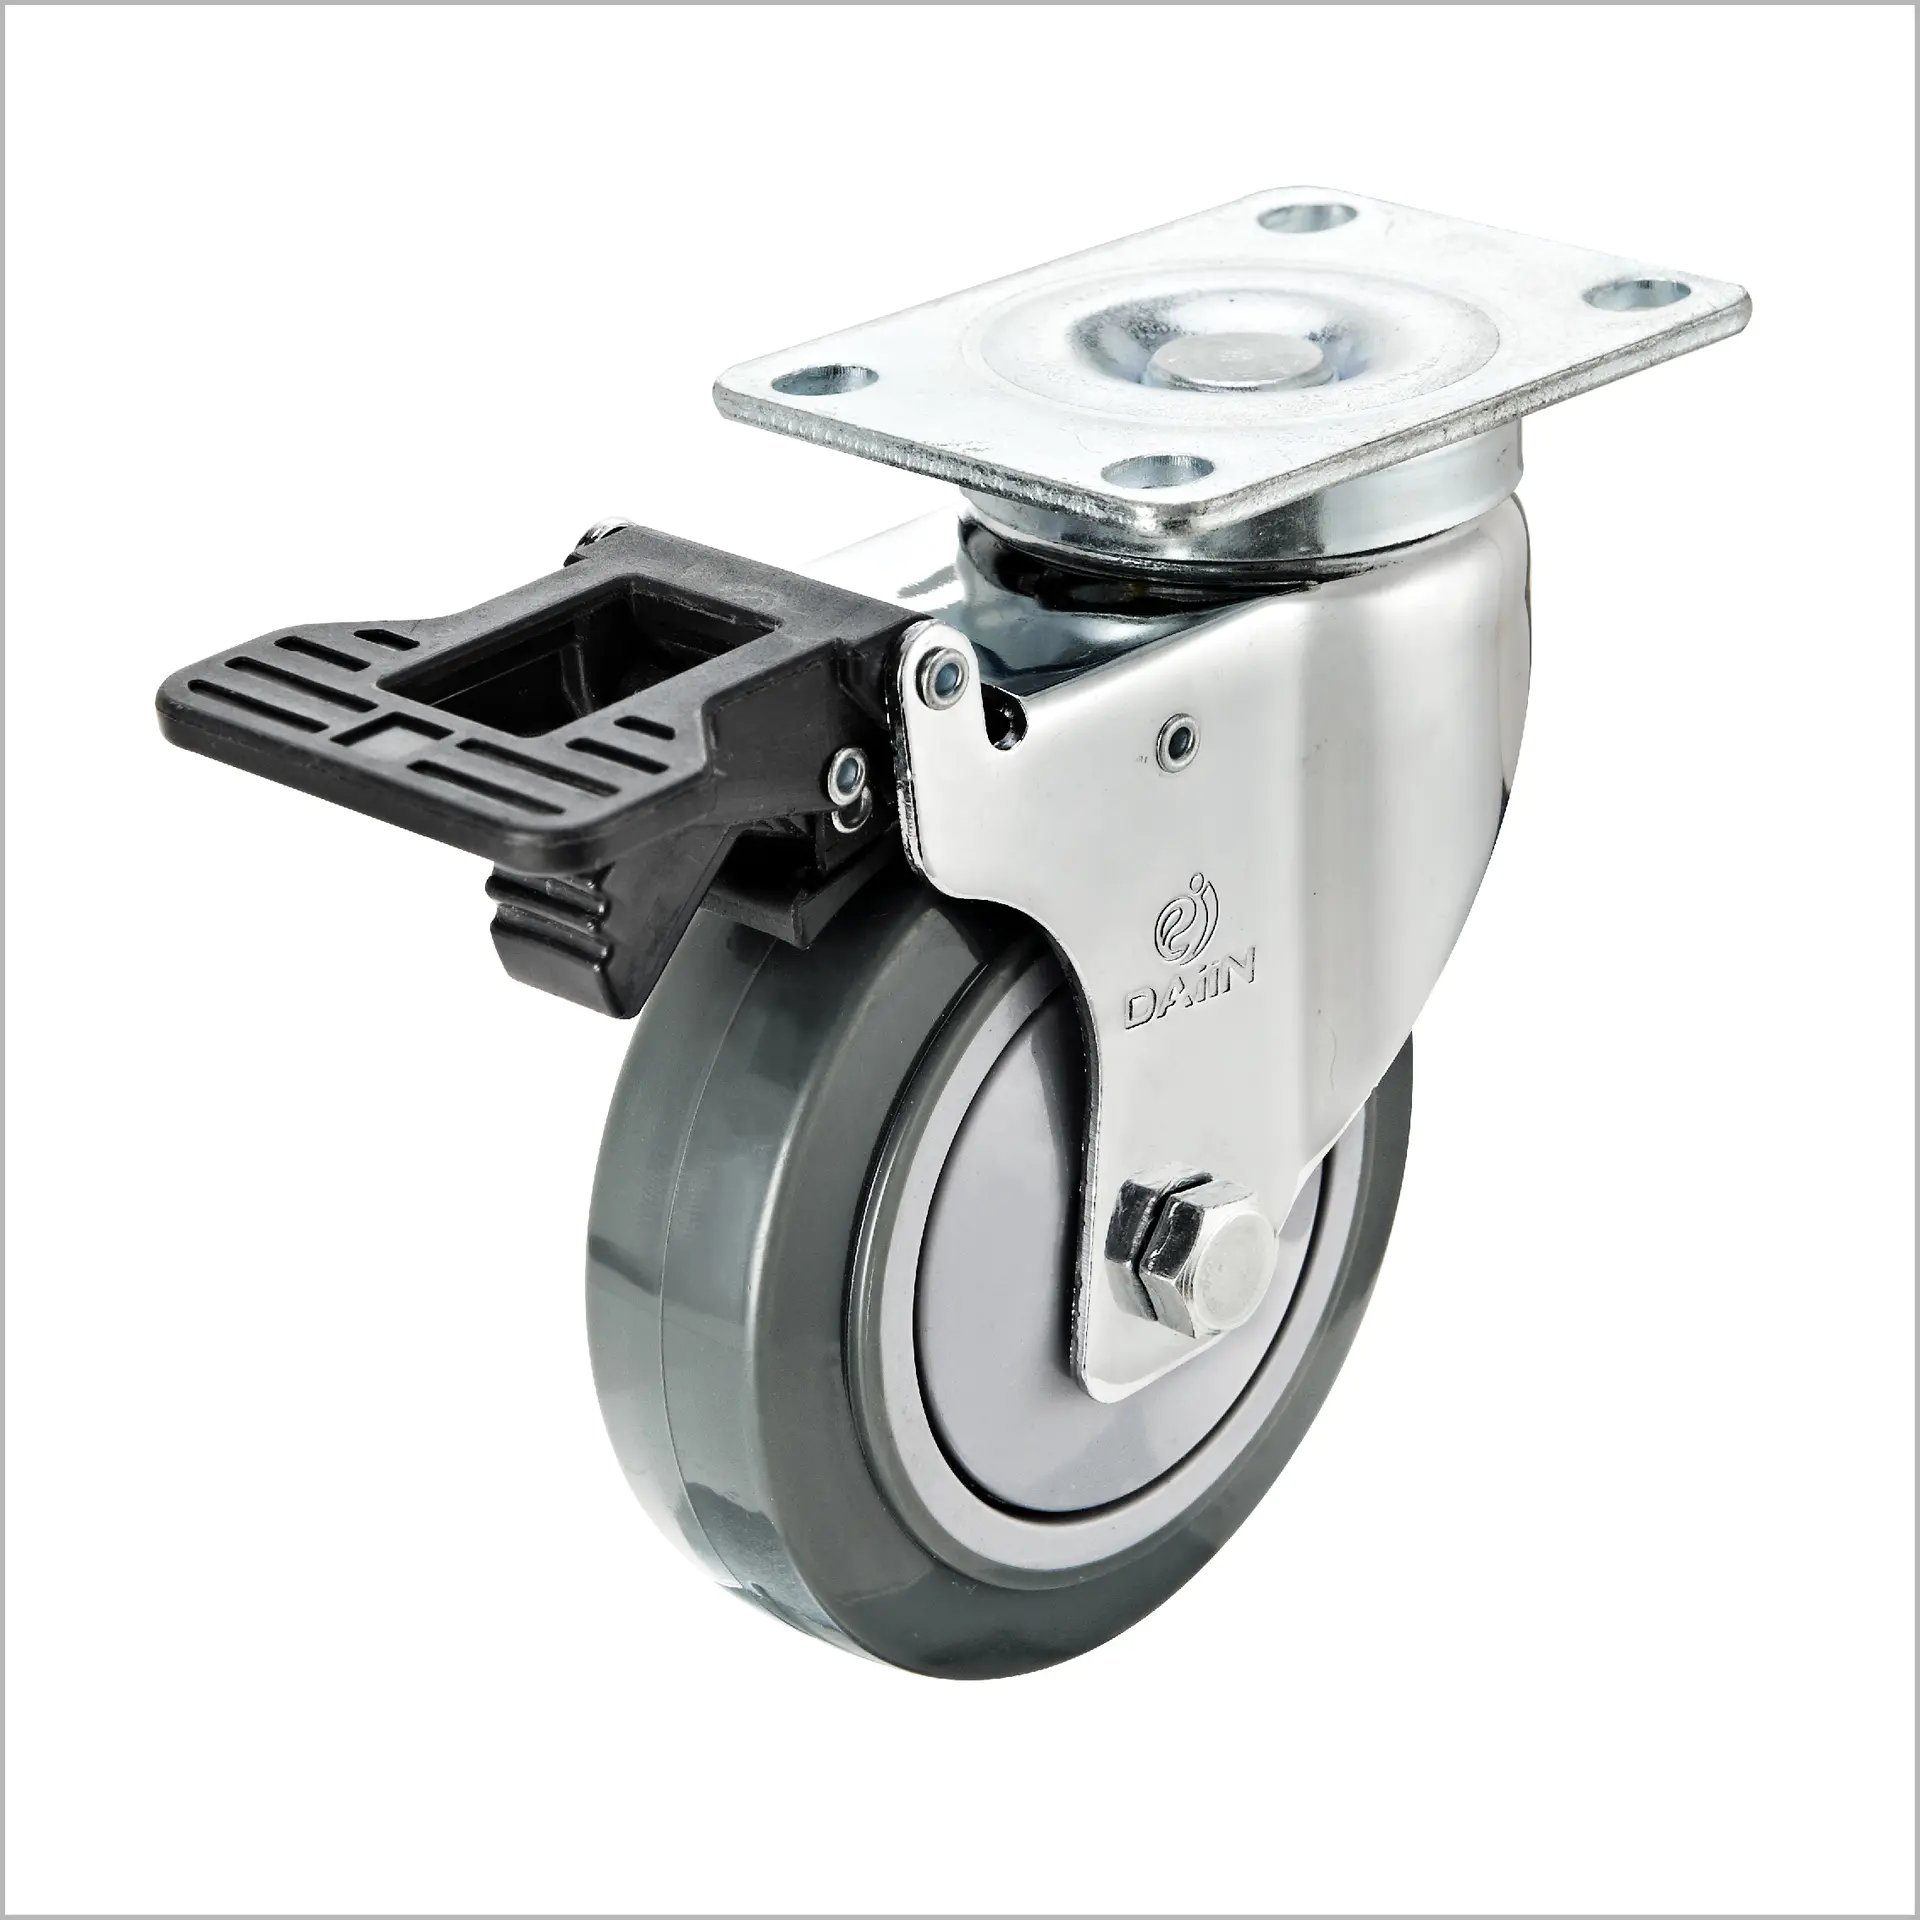 Heavy load capacity 3,4,5 inch industrial PU caster wheels for carts